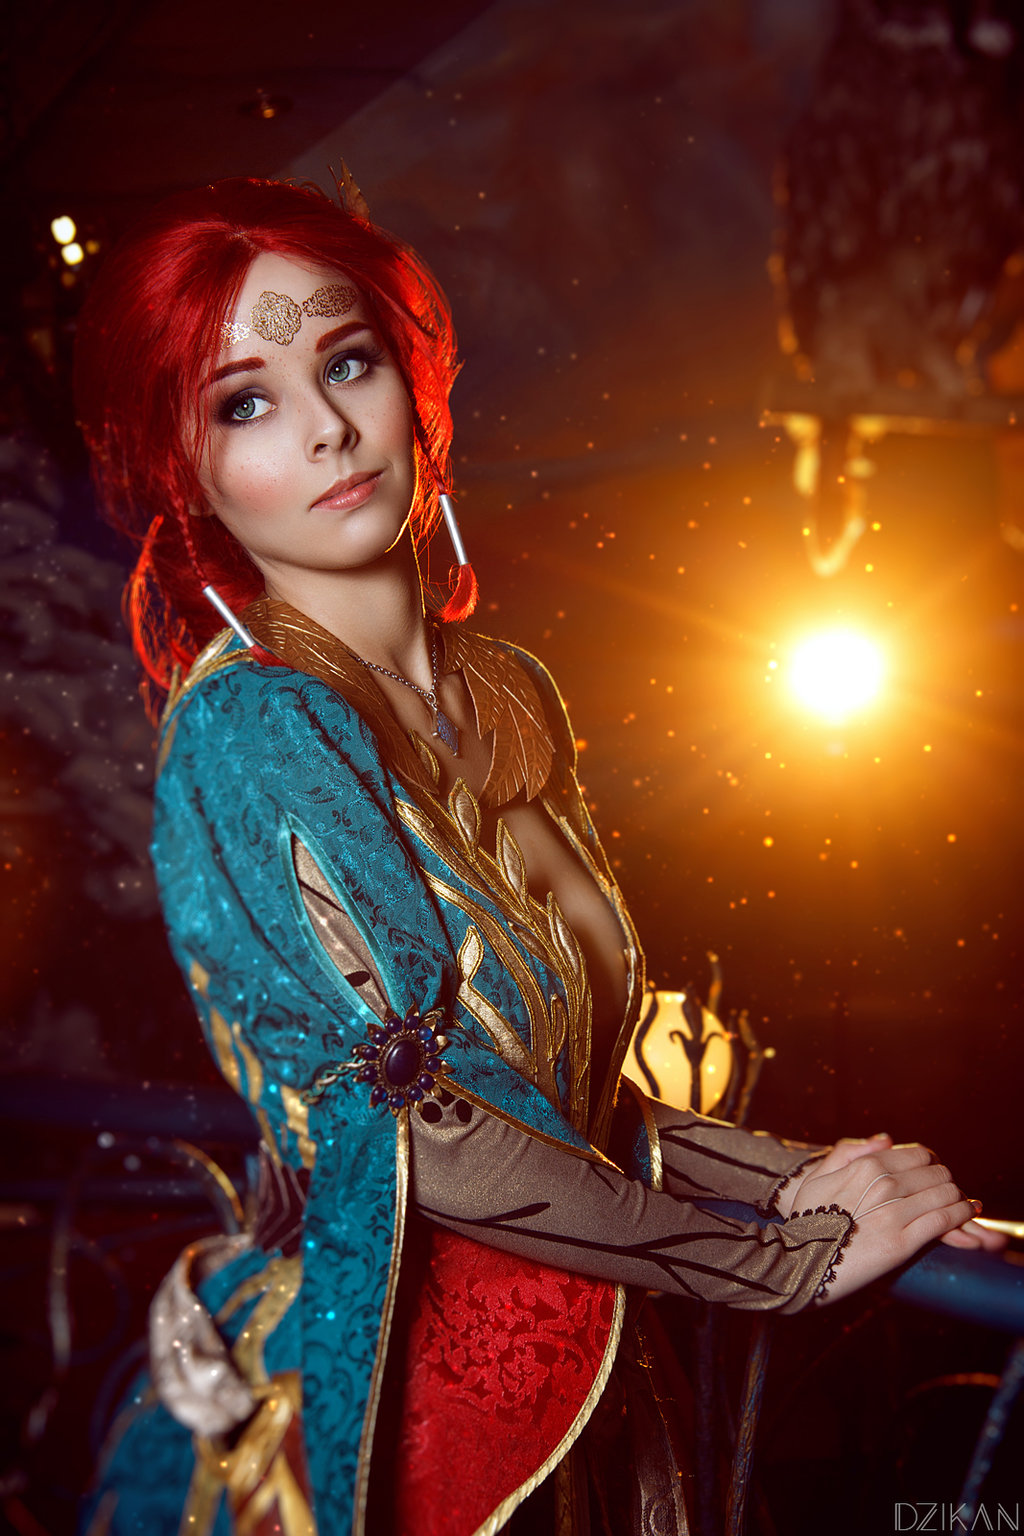 the_witcher___triss_merigold_cosplay_by_dzikan-dantbig.jpg